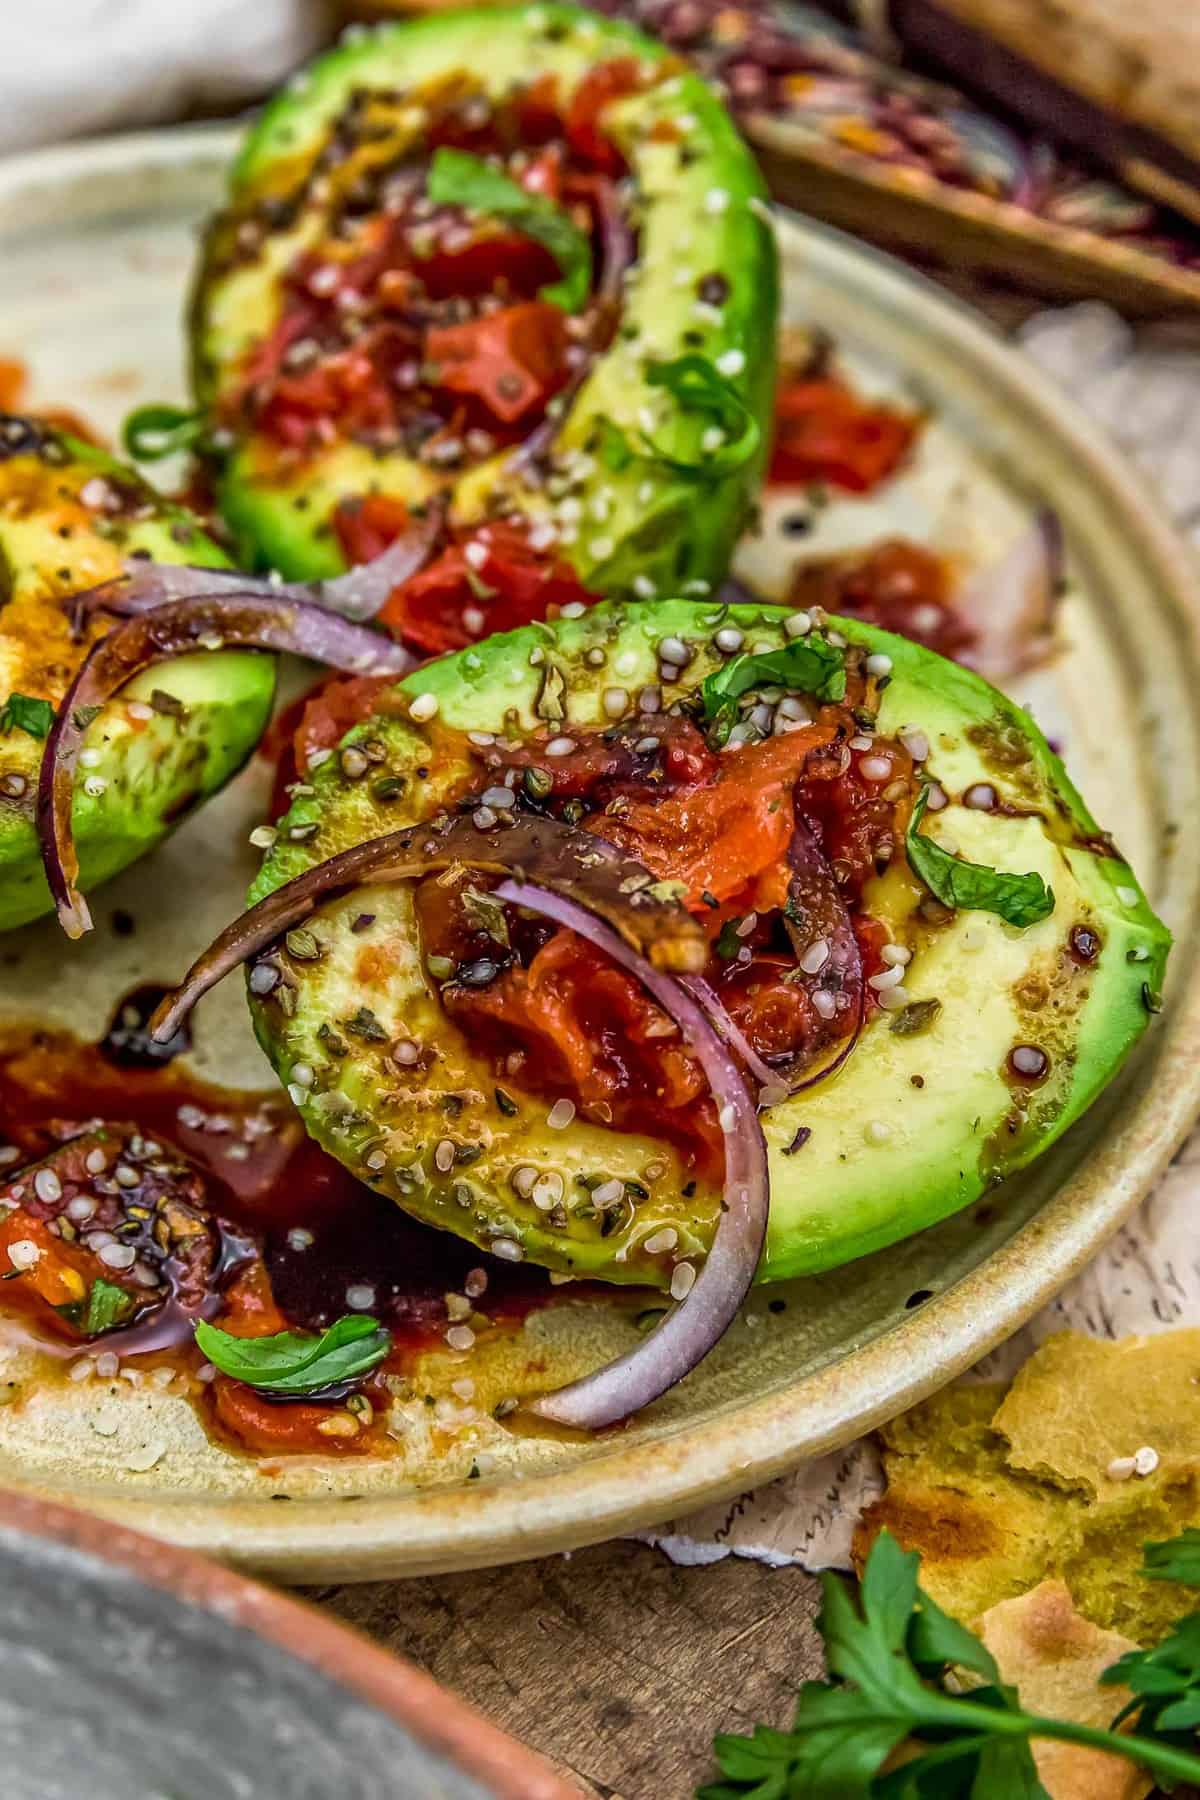 Roasted Tomato Stuffed Avocados with Balsamic Reduction